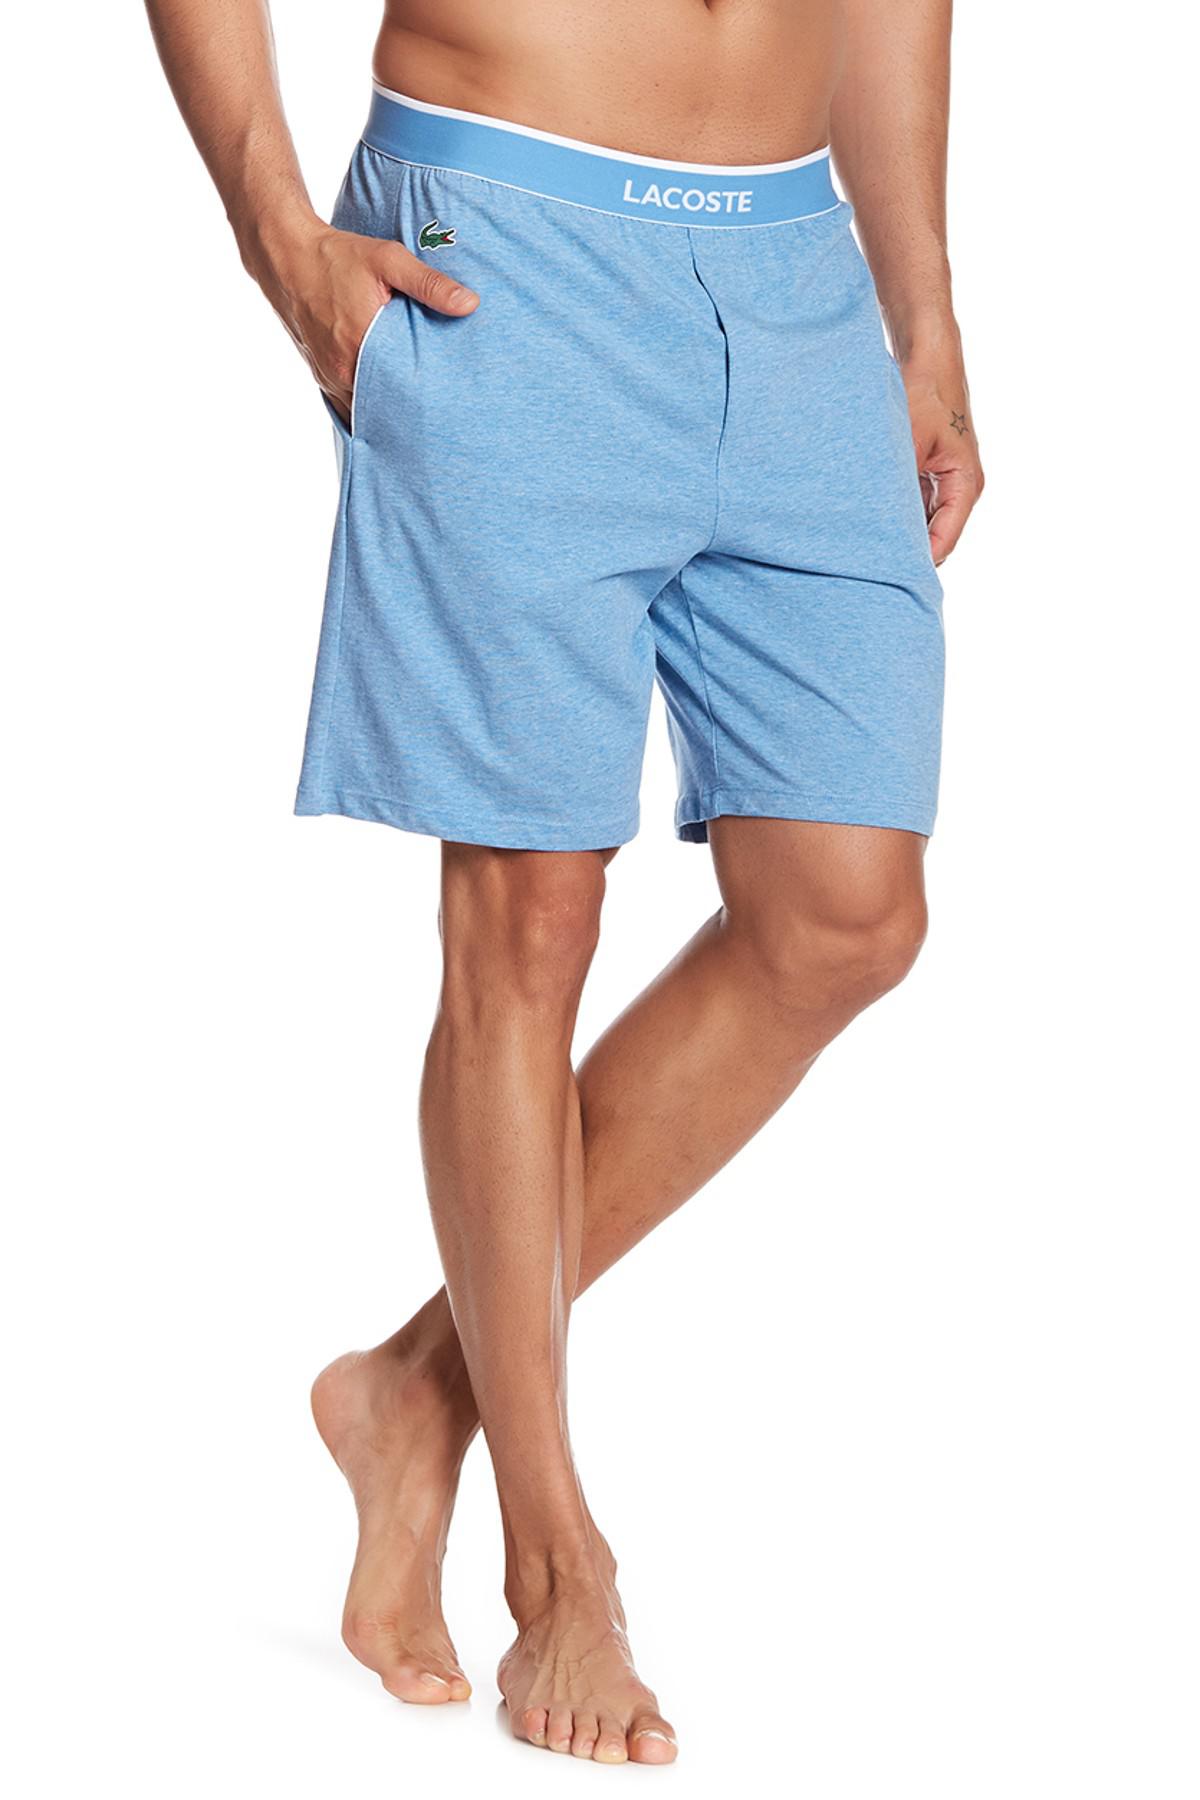 Lacoste Cotton Stretch Sleep Shorts in 